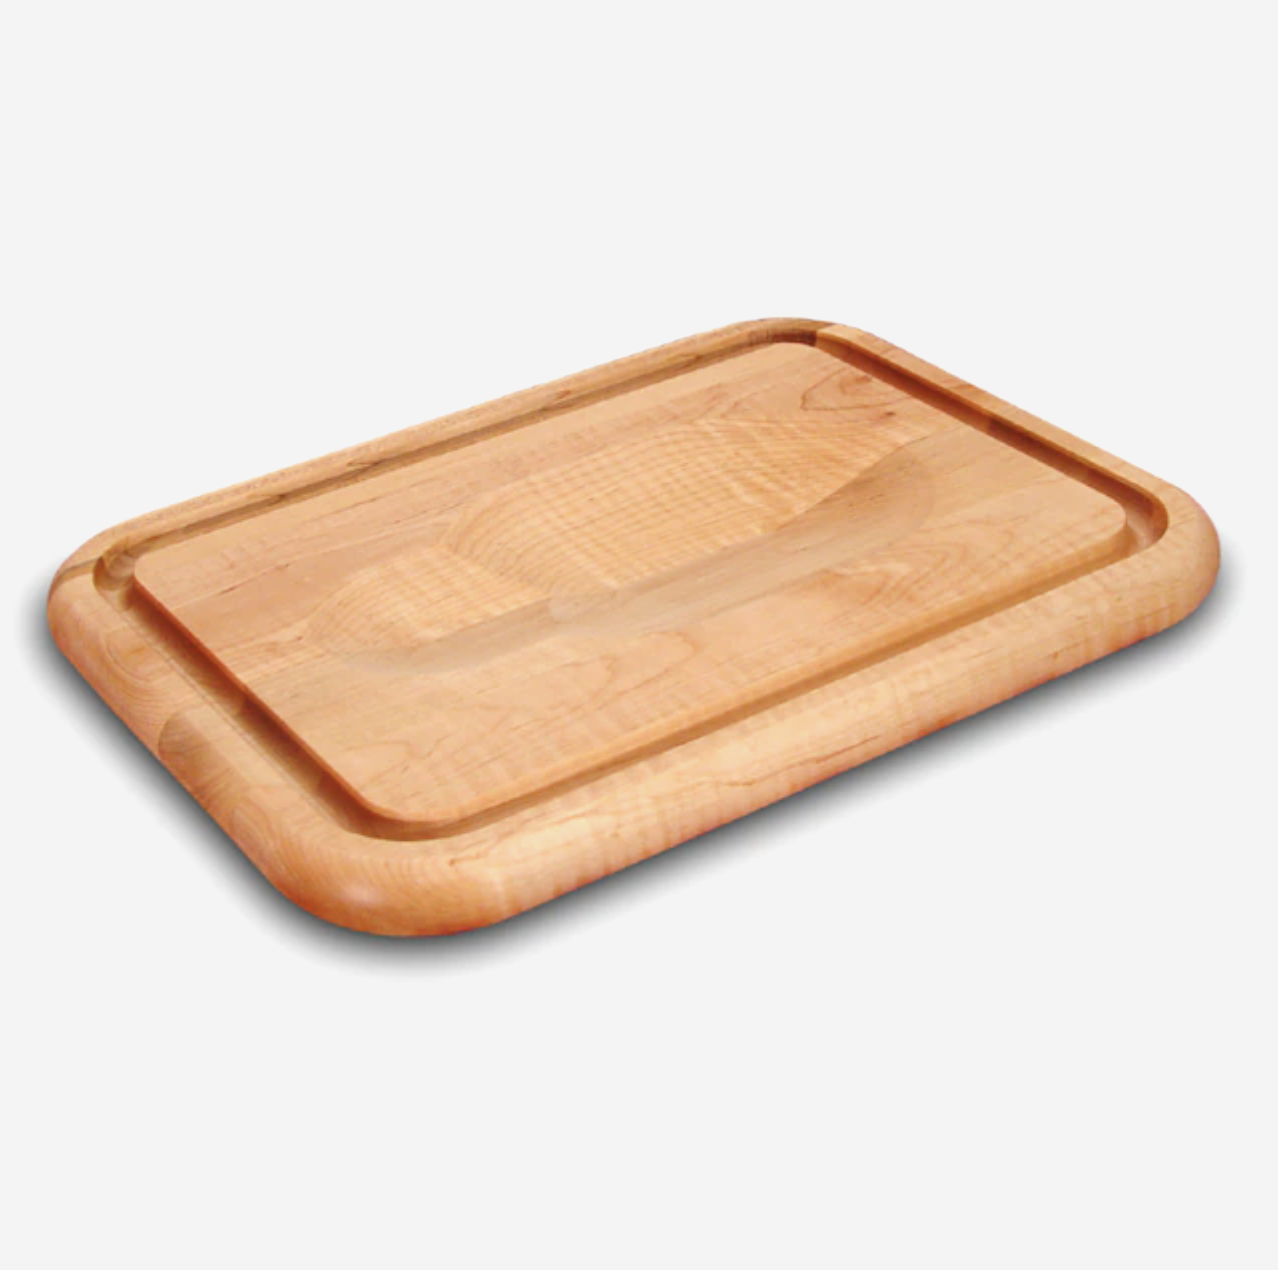 the wooden cutting board